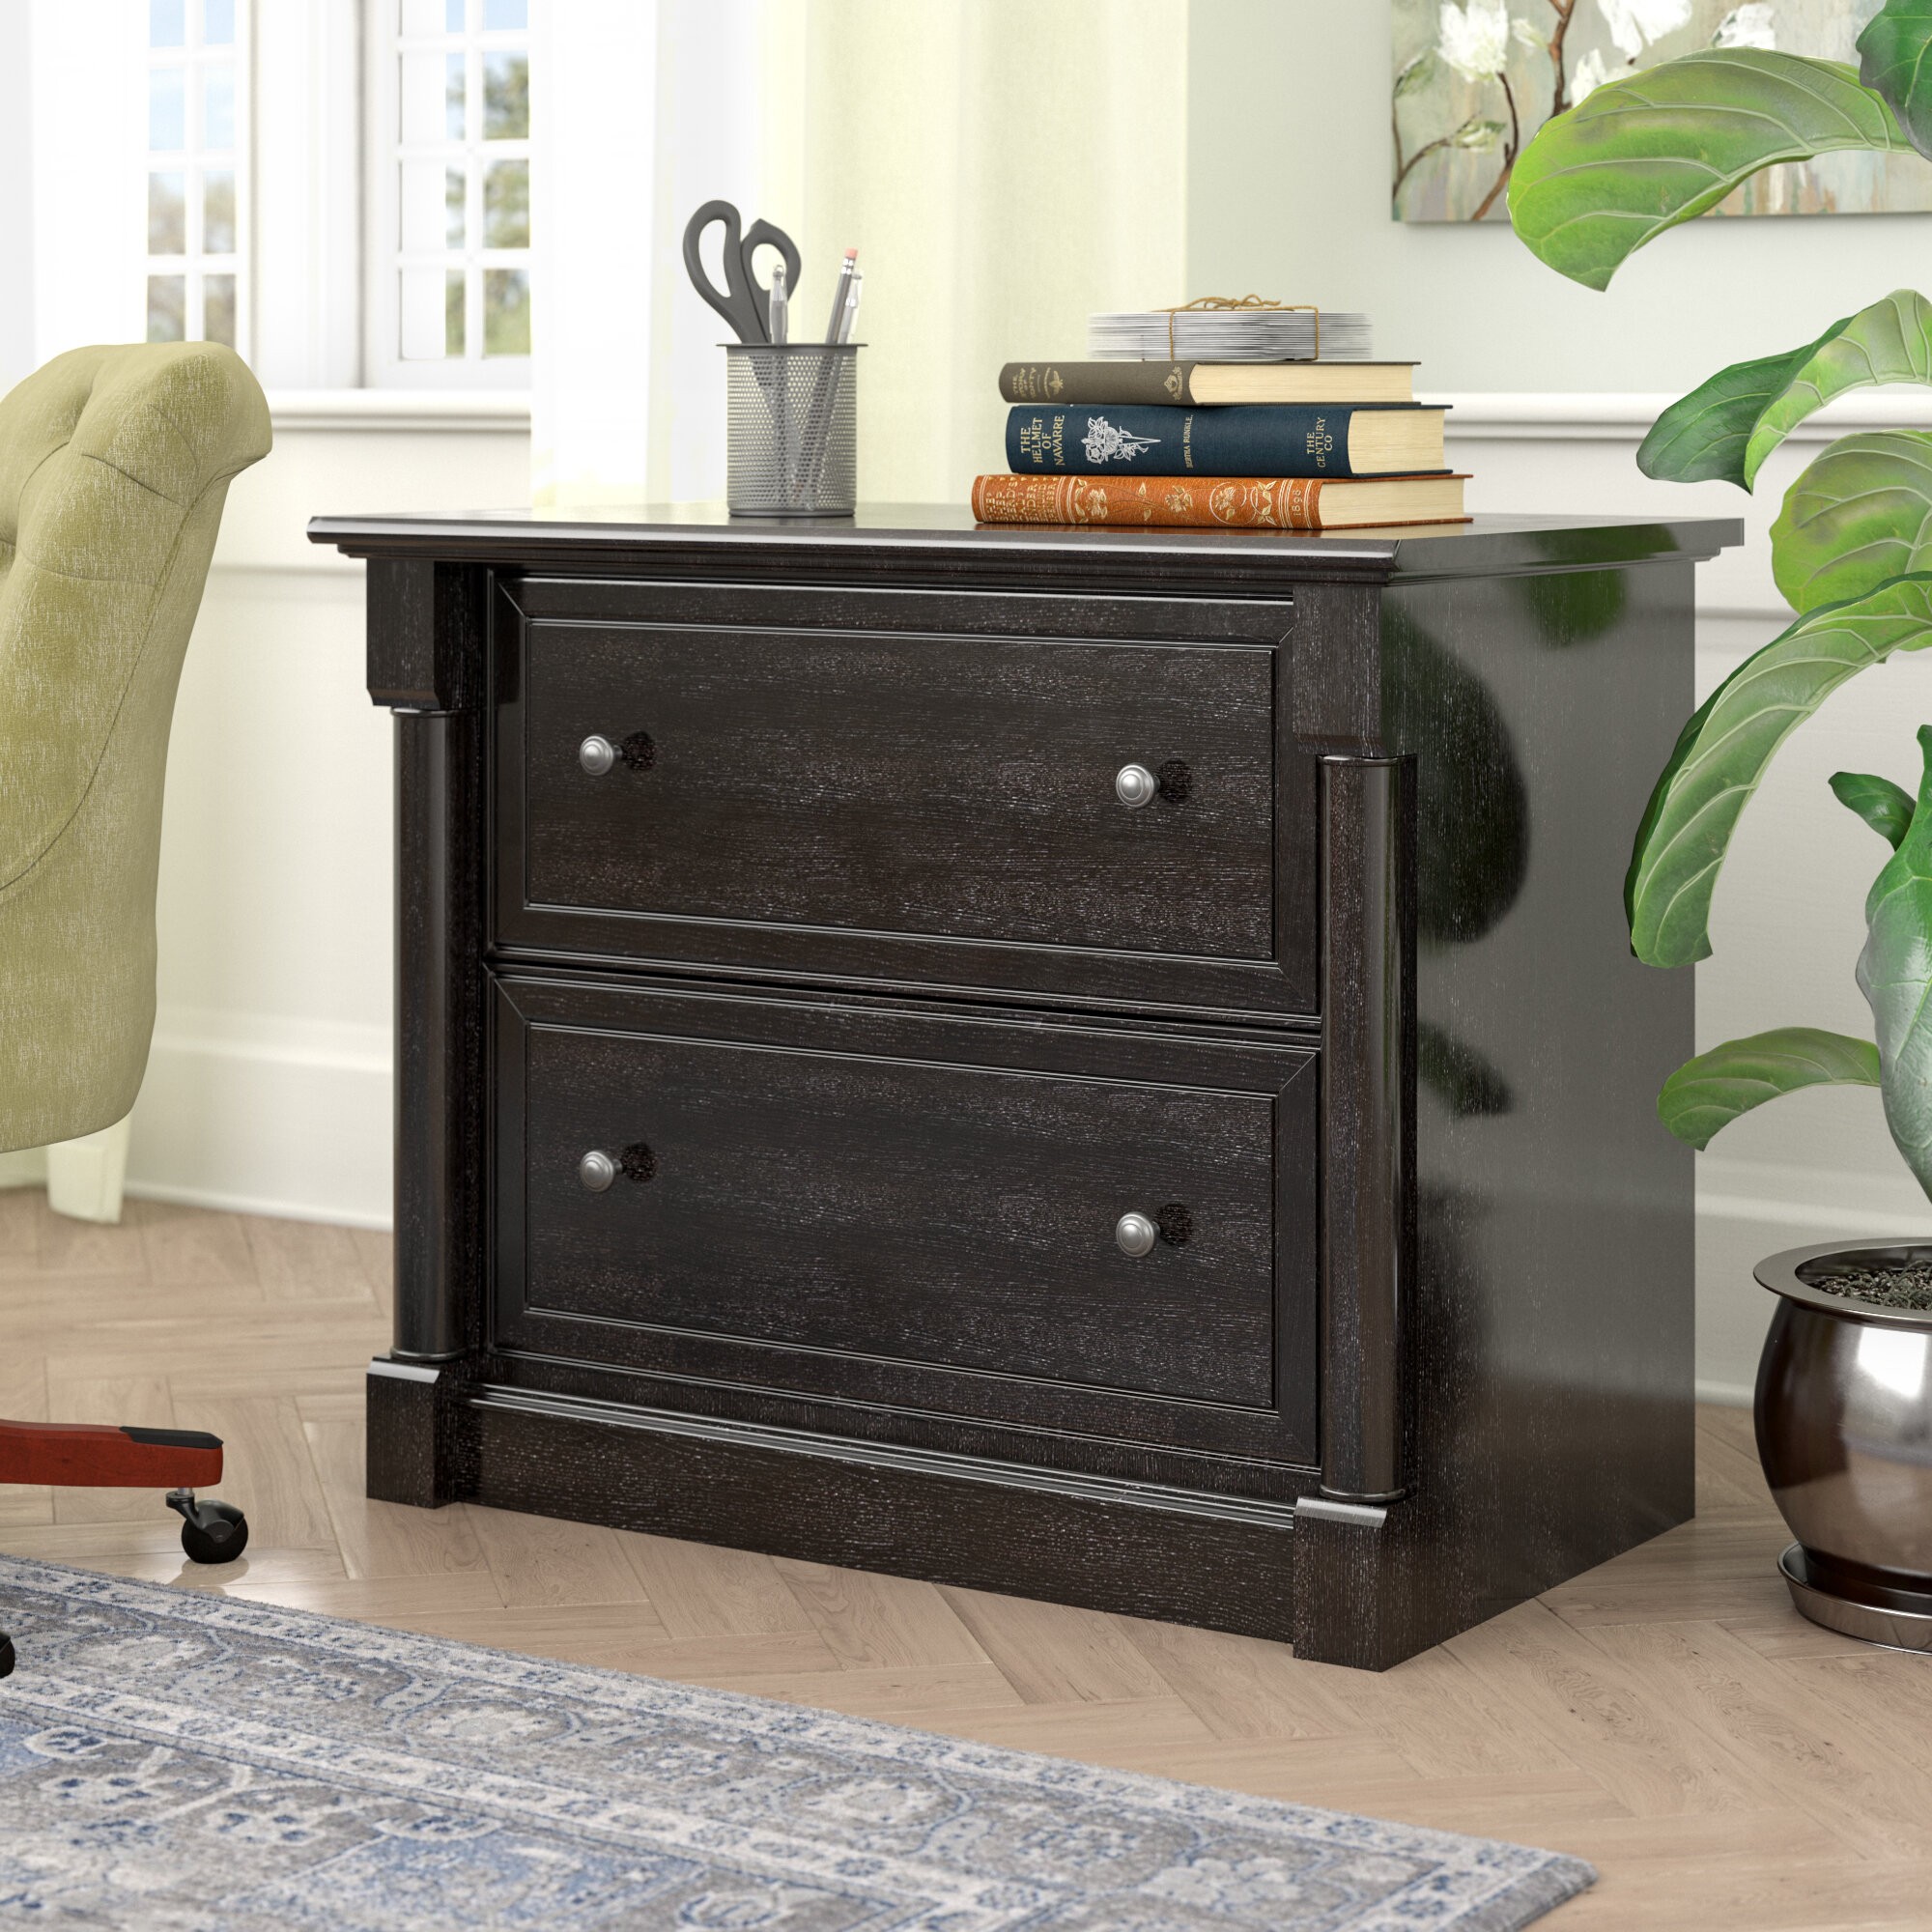 Walworth 2-Drawer Lateral Filing Cabinet